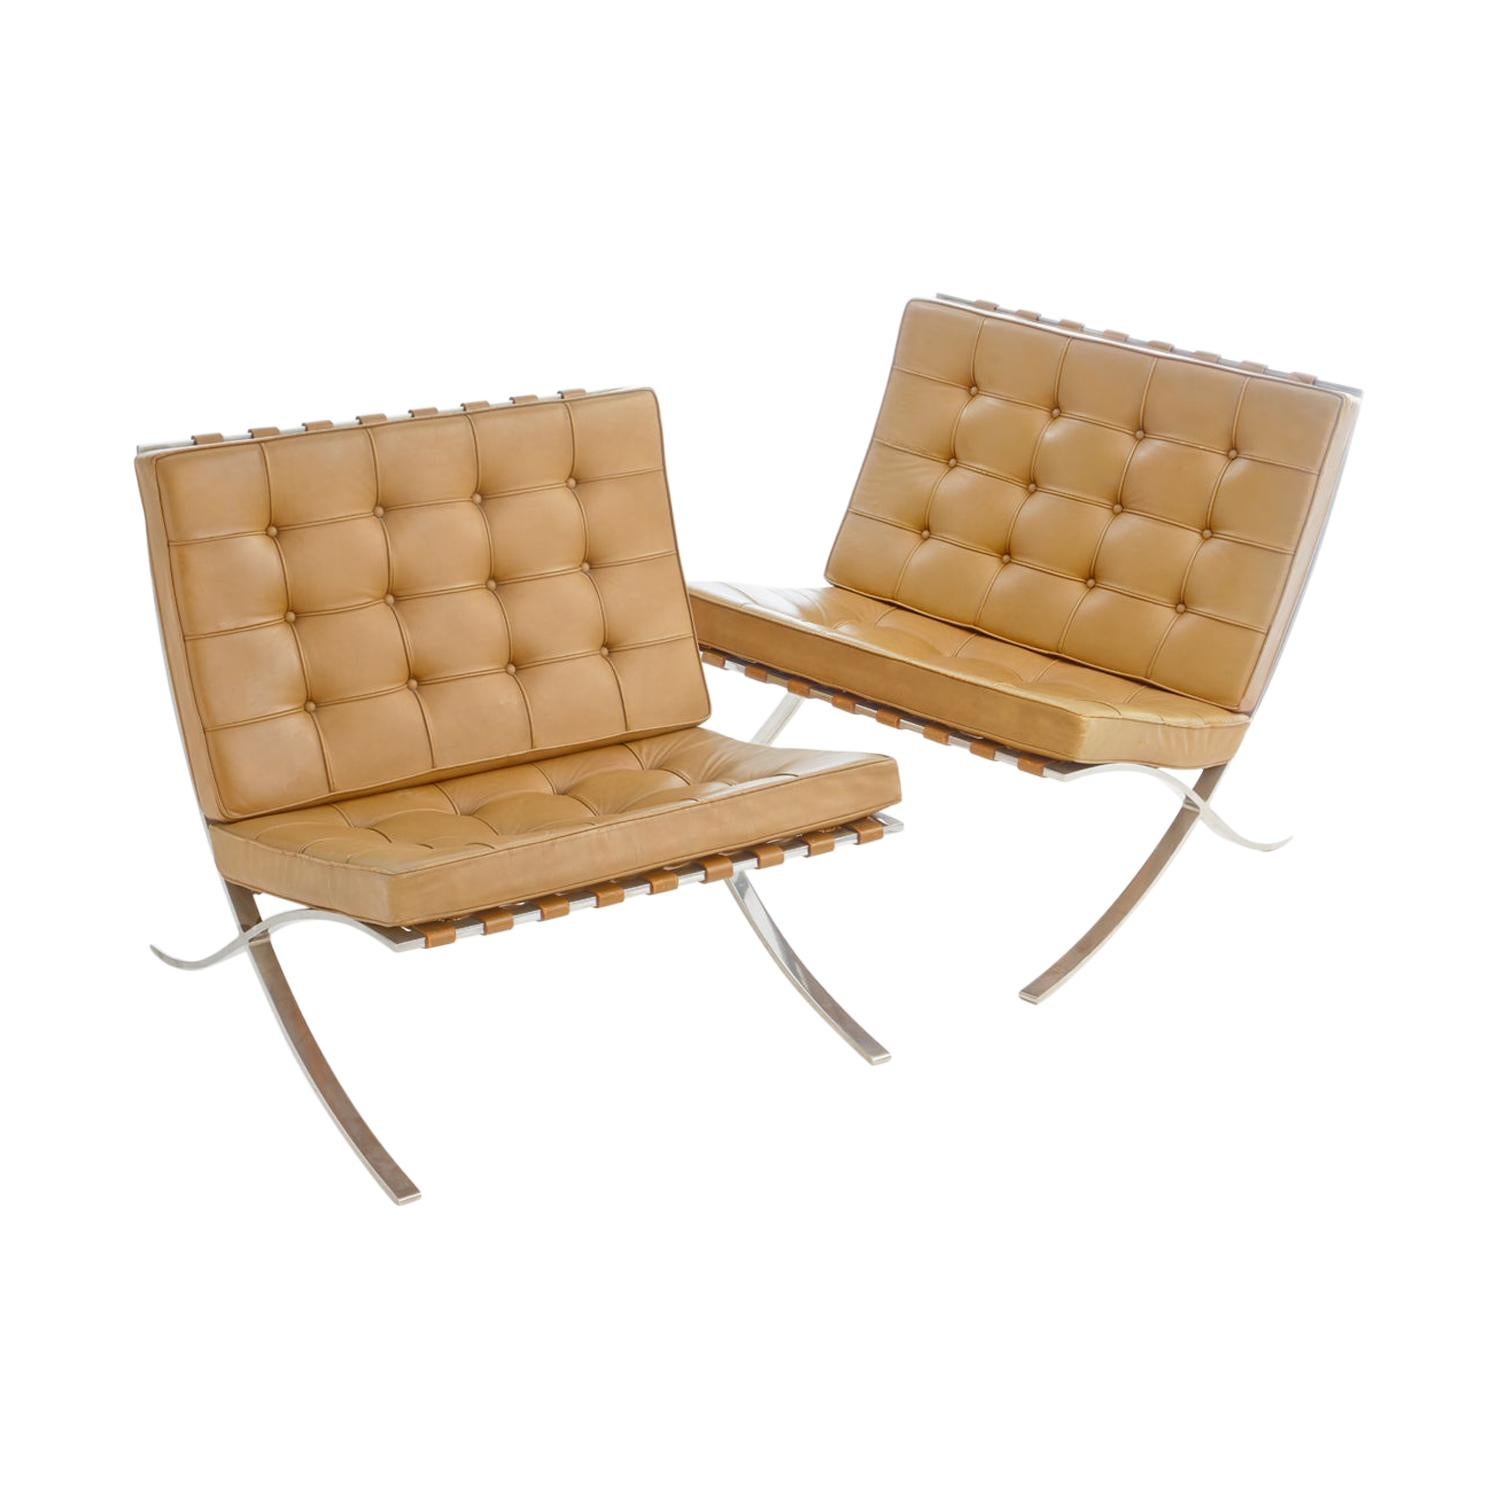 Pair of Knoll Barcelona Chairs Tan Leather 1960s Mies van der Rohe